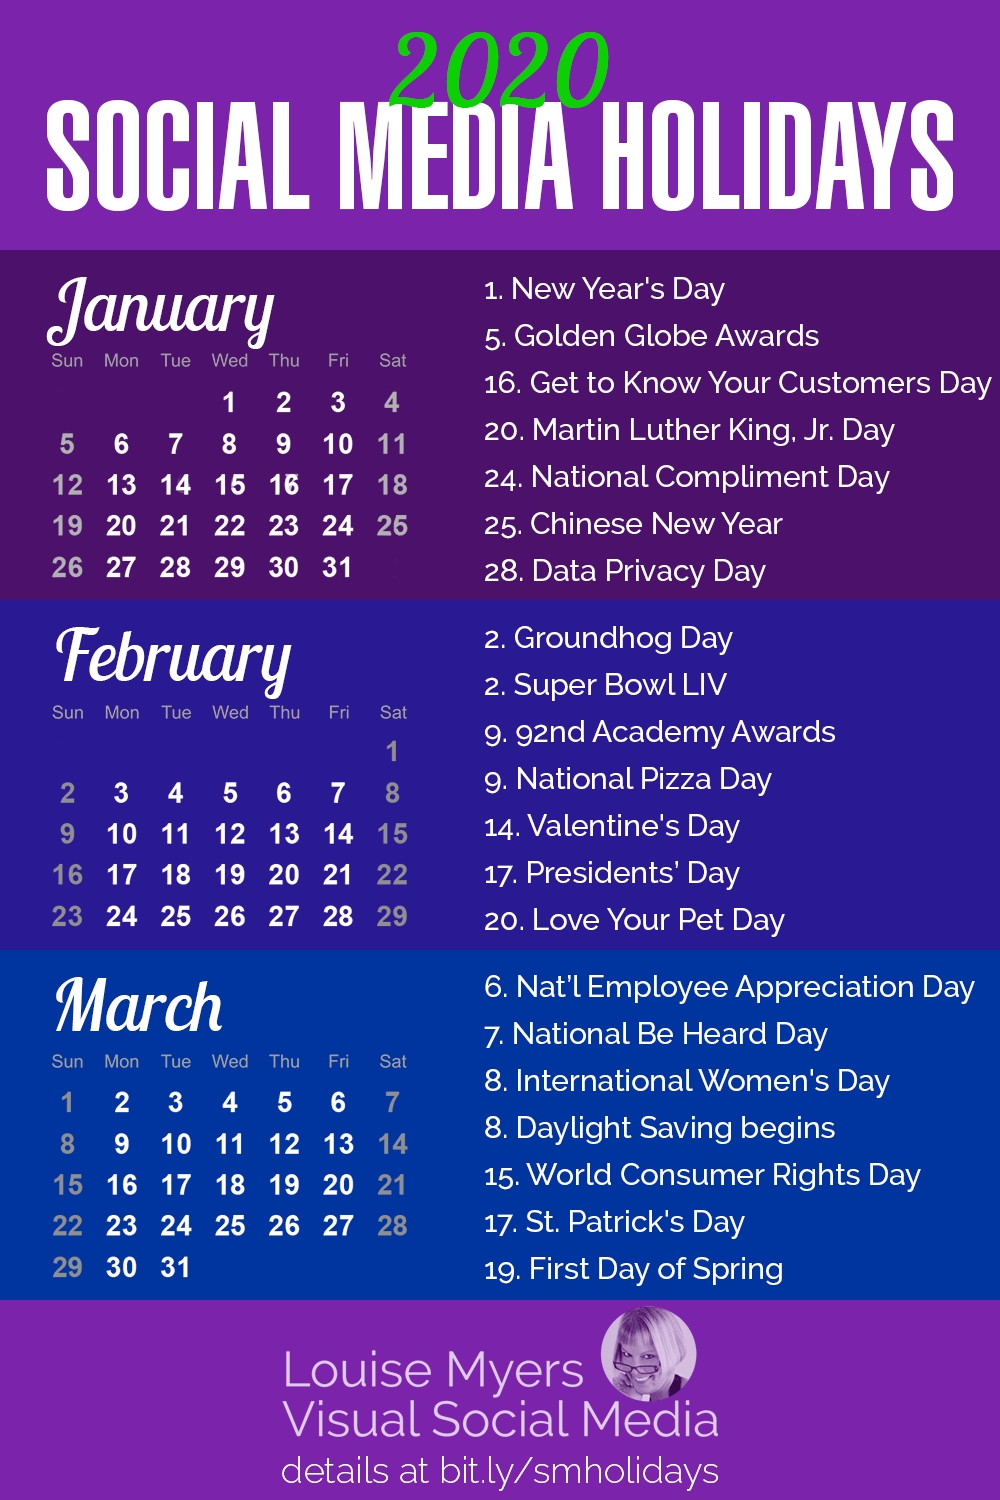 84 Social Media Holidays You Need In 2020: Indispensable!-List By Month Of All Holidays